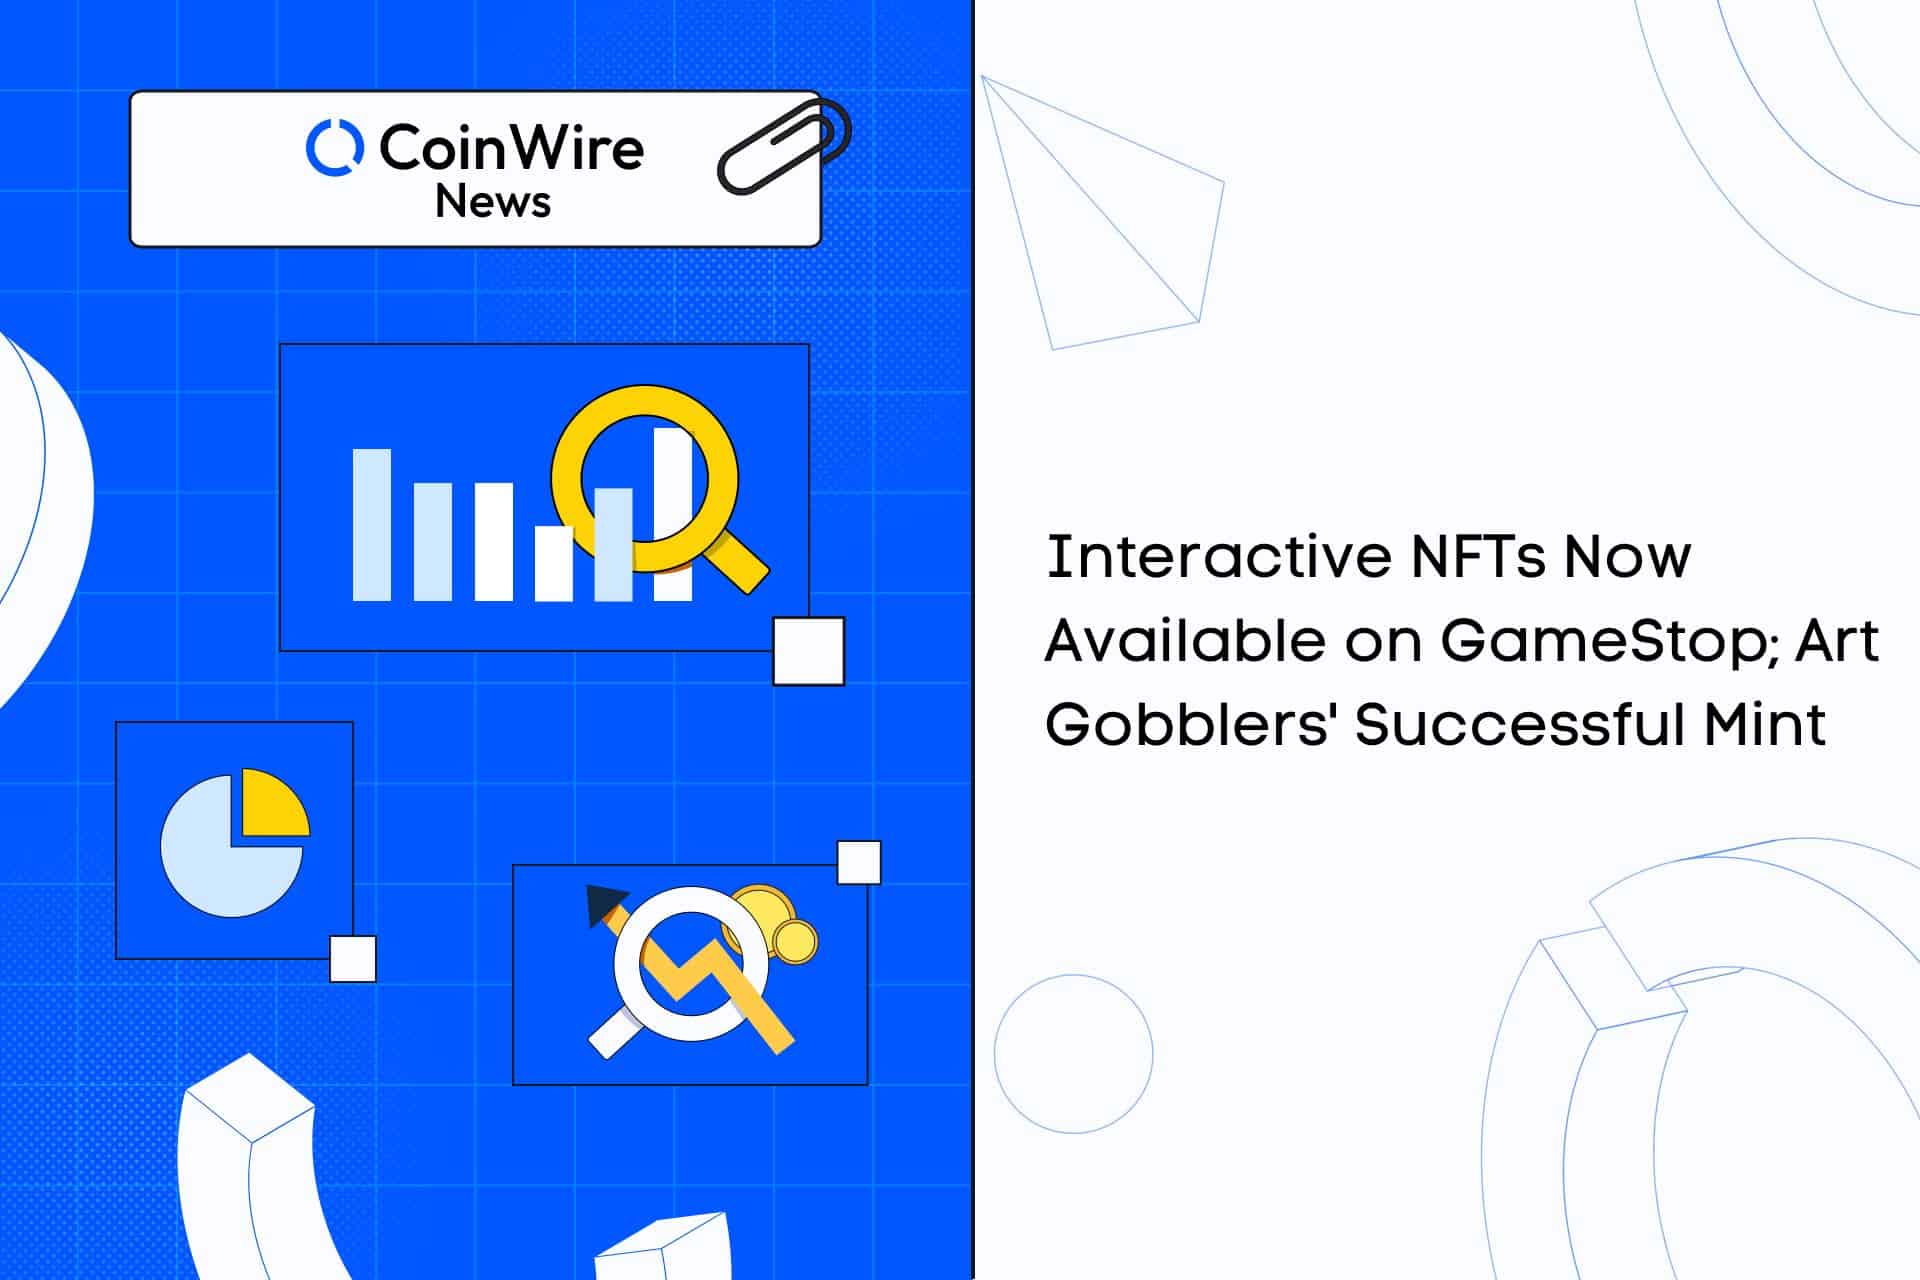 Interactive Nfts Now Available On Gamestop; Art Gobblers' Successful Mint